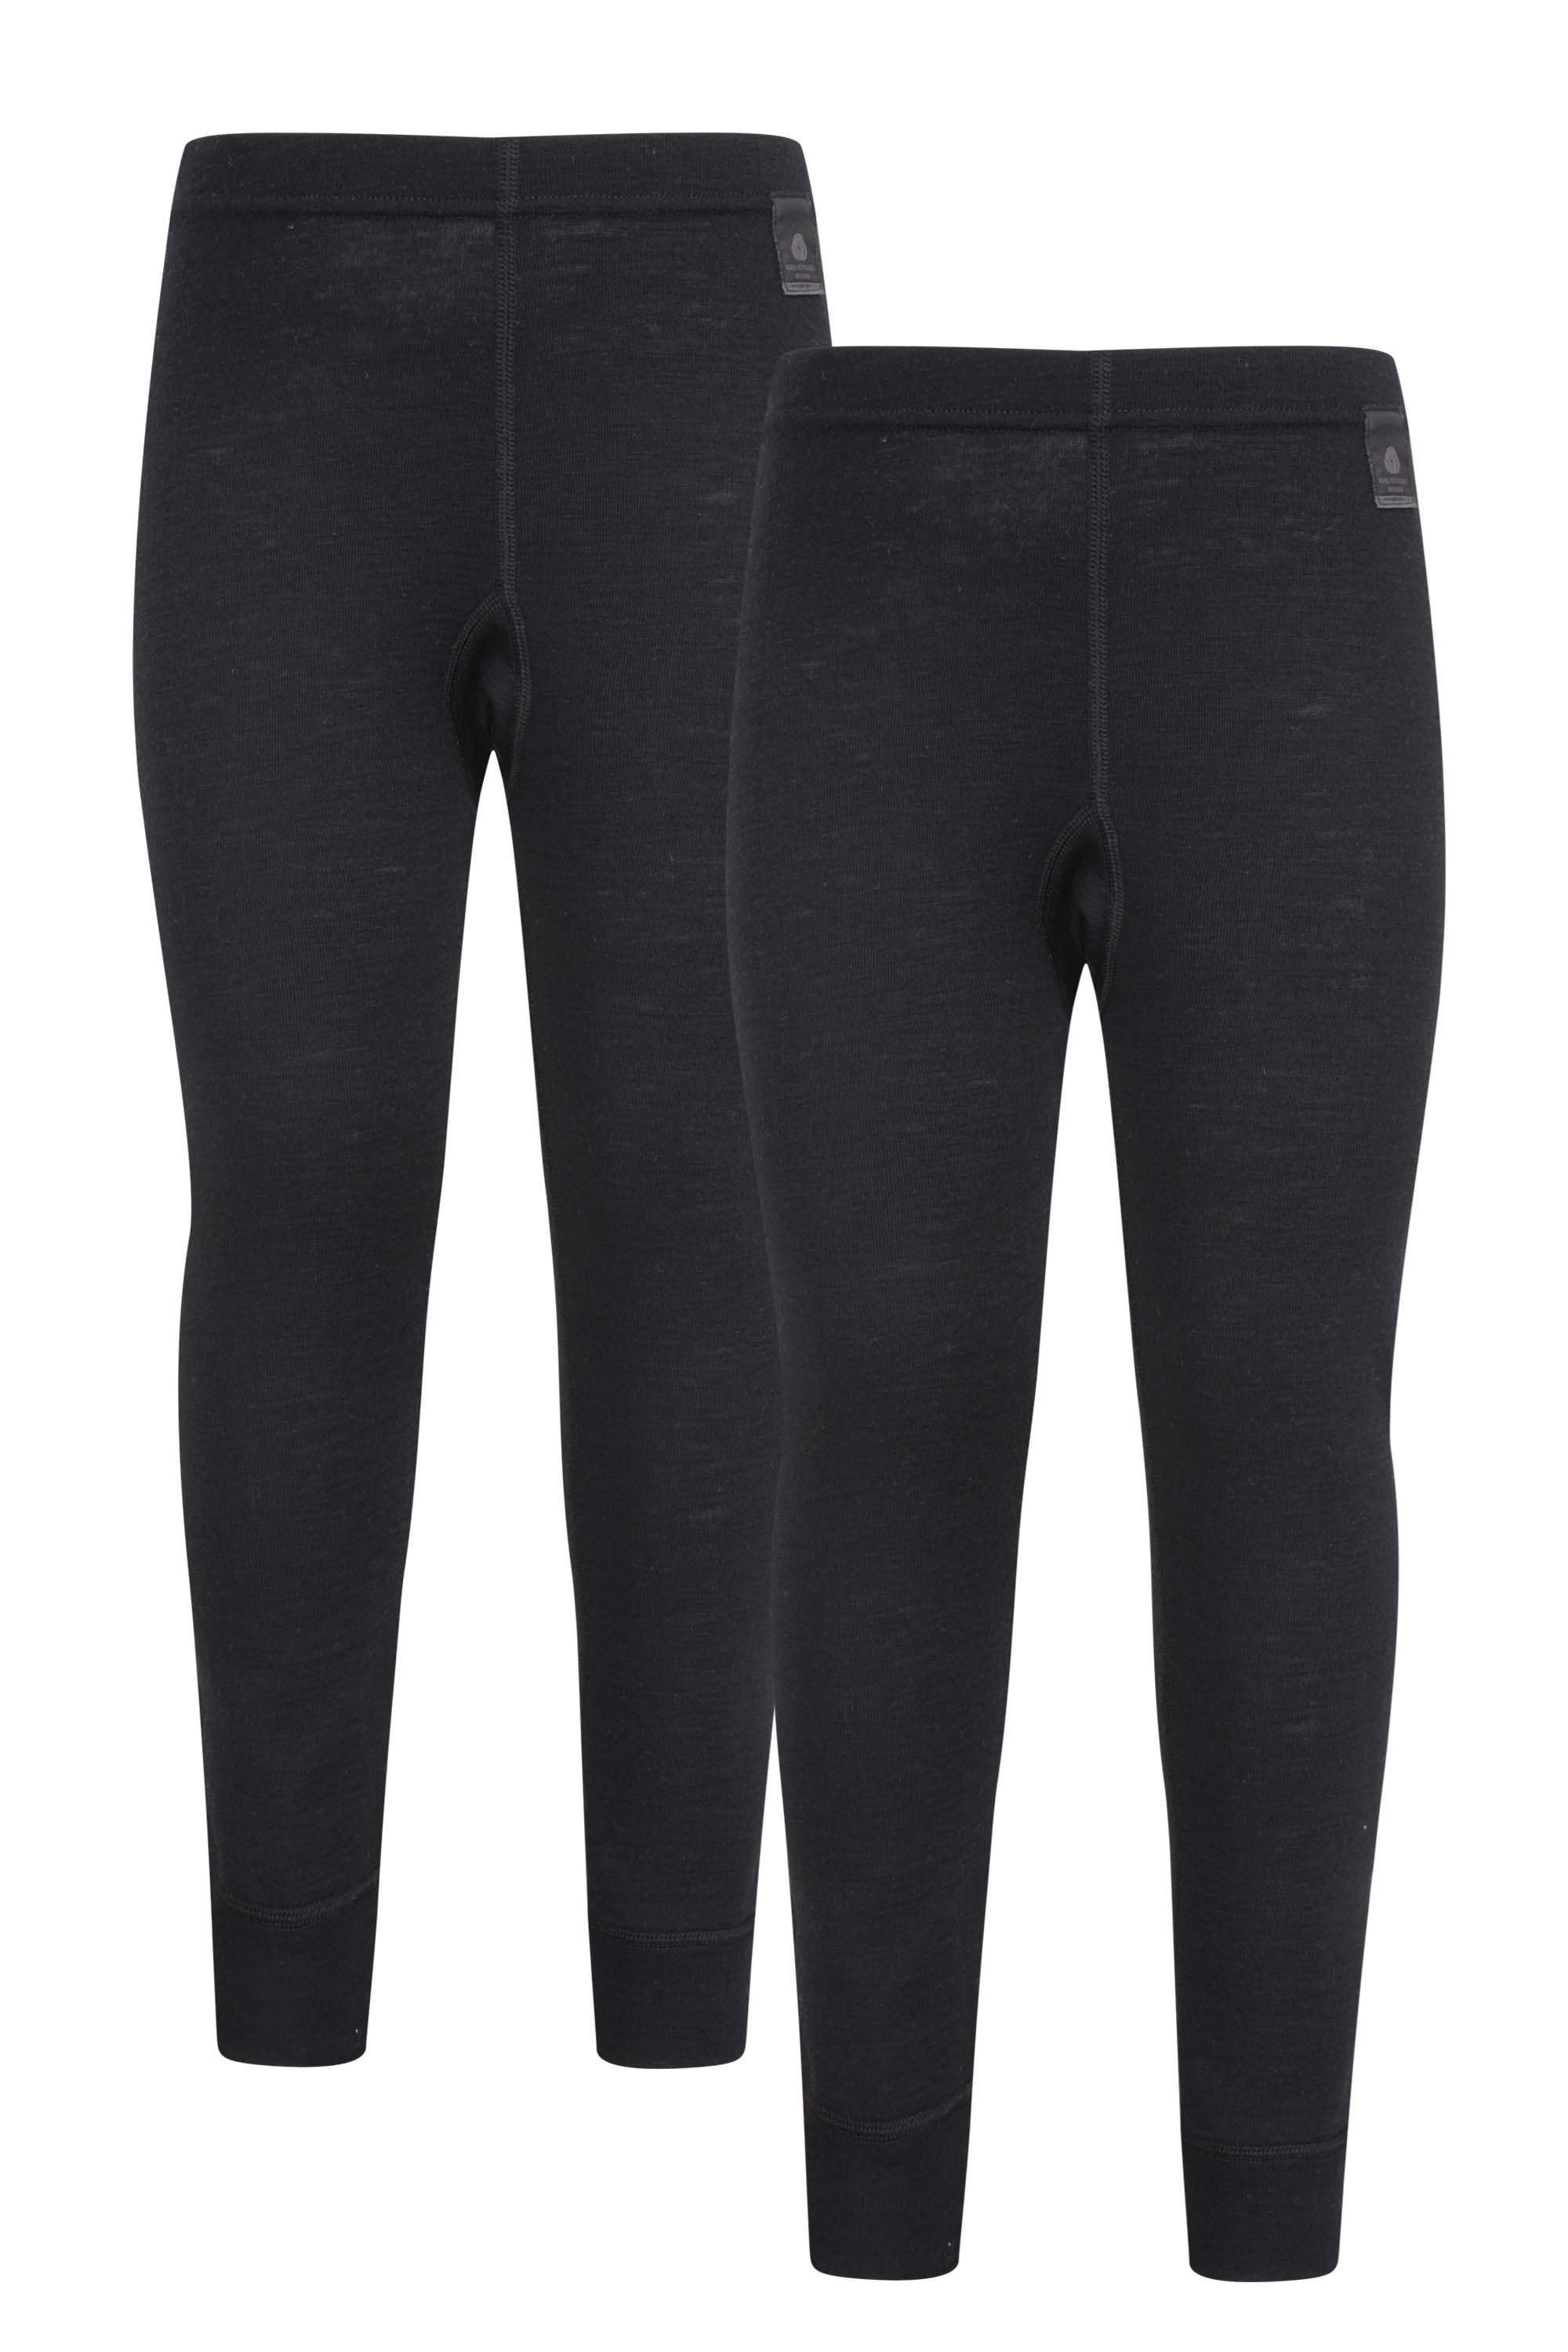 Mountain Warehouse Merino Womens Thermal Base Layer Pants Breathable High Wicking Easy Care -Ideal for Travelling Antibacterial Bottoms Lightweight Trousers 